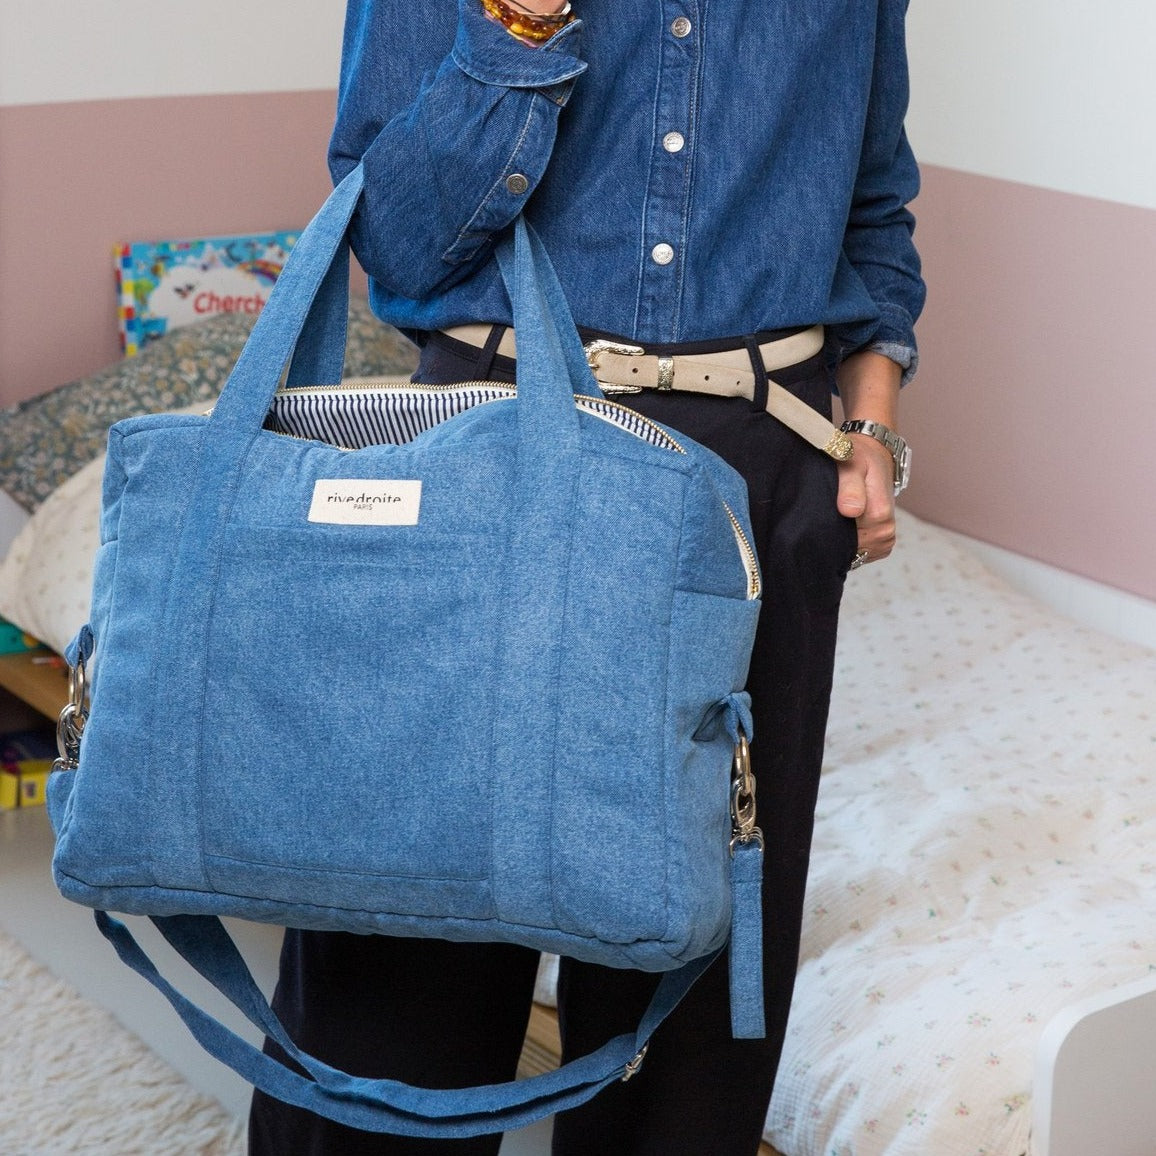 Top Tips for Effectively Packing a Diaper Bag | JuJuBe